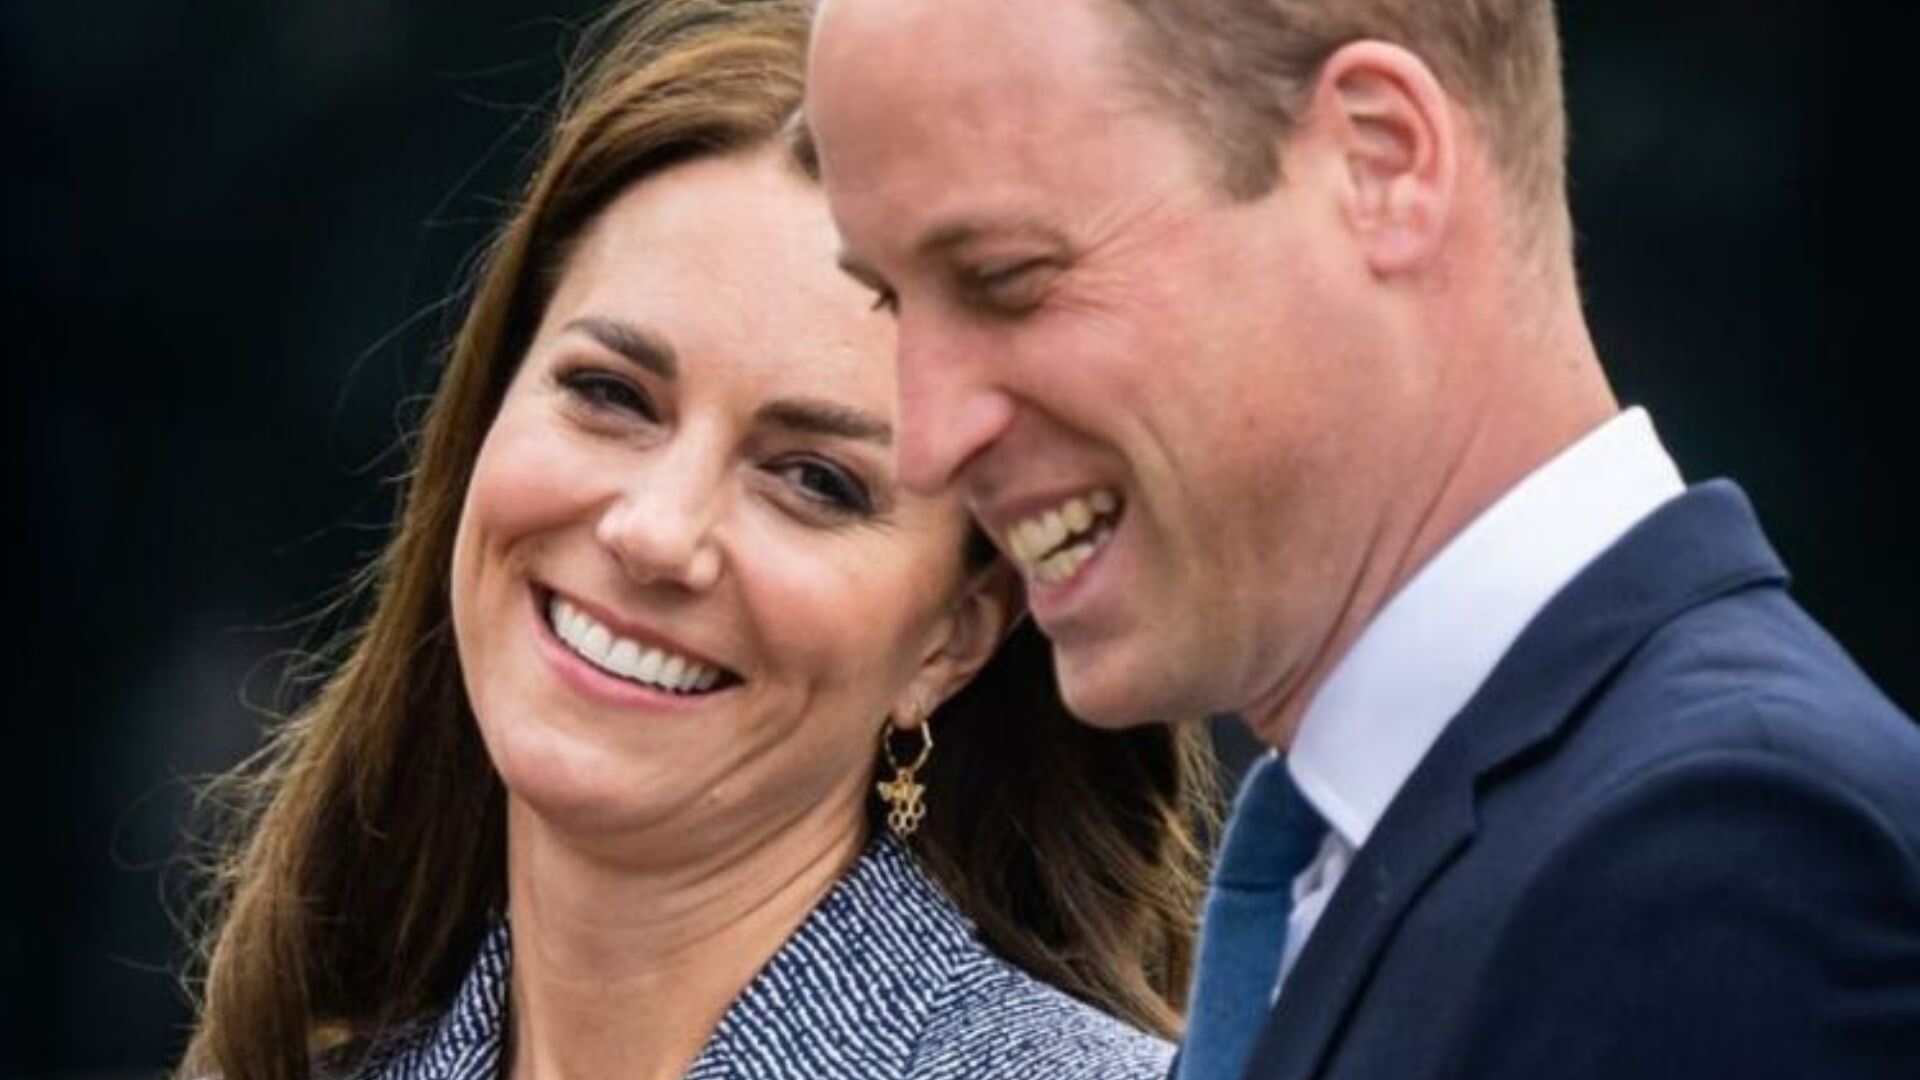 Royal Couple Prince William & Kate Middleton Allude To An ‘Exciting New Project’